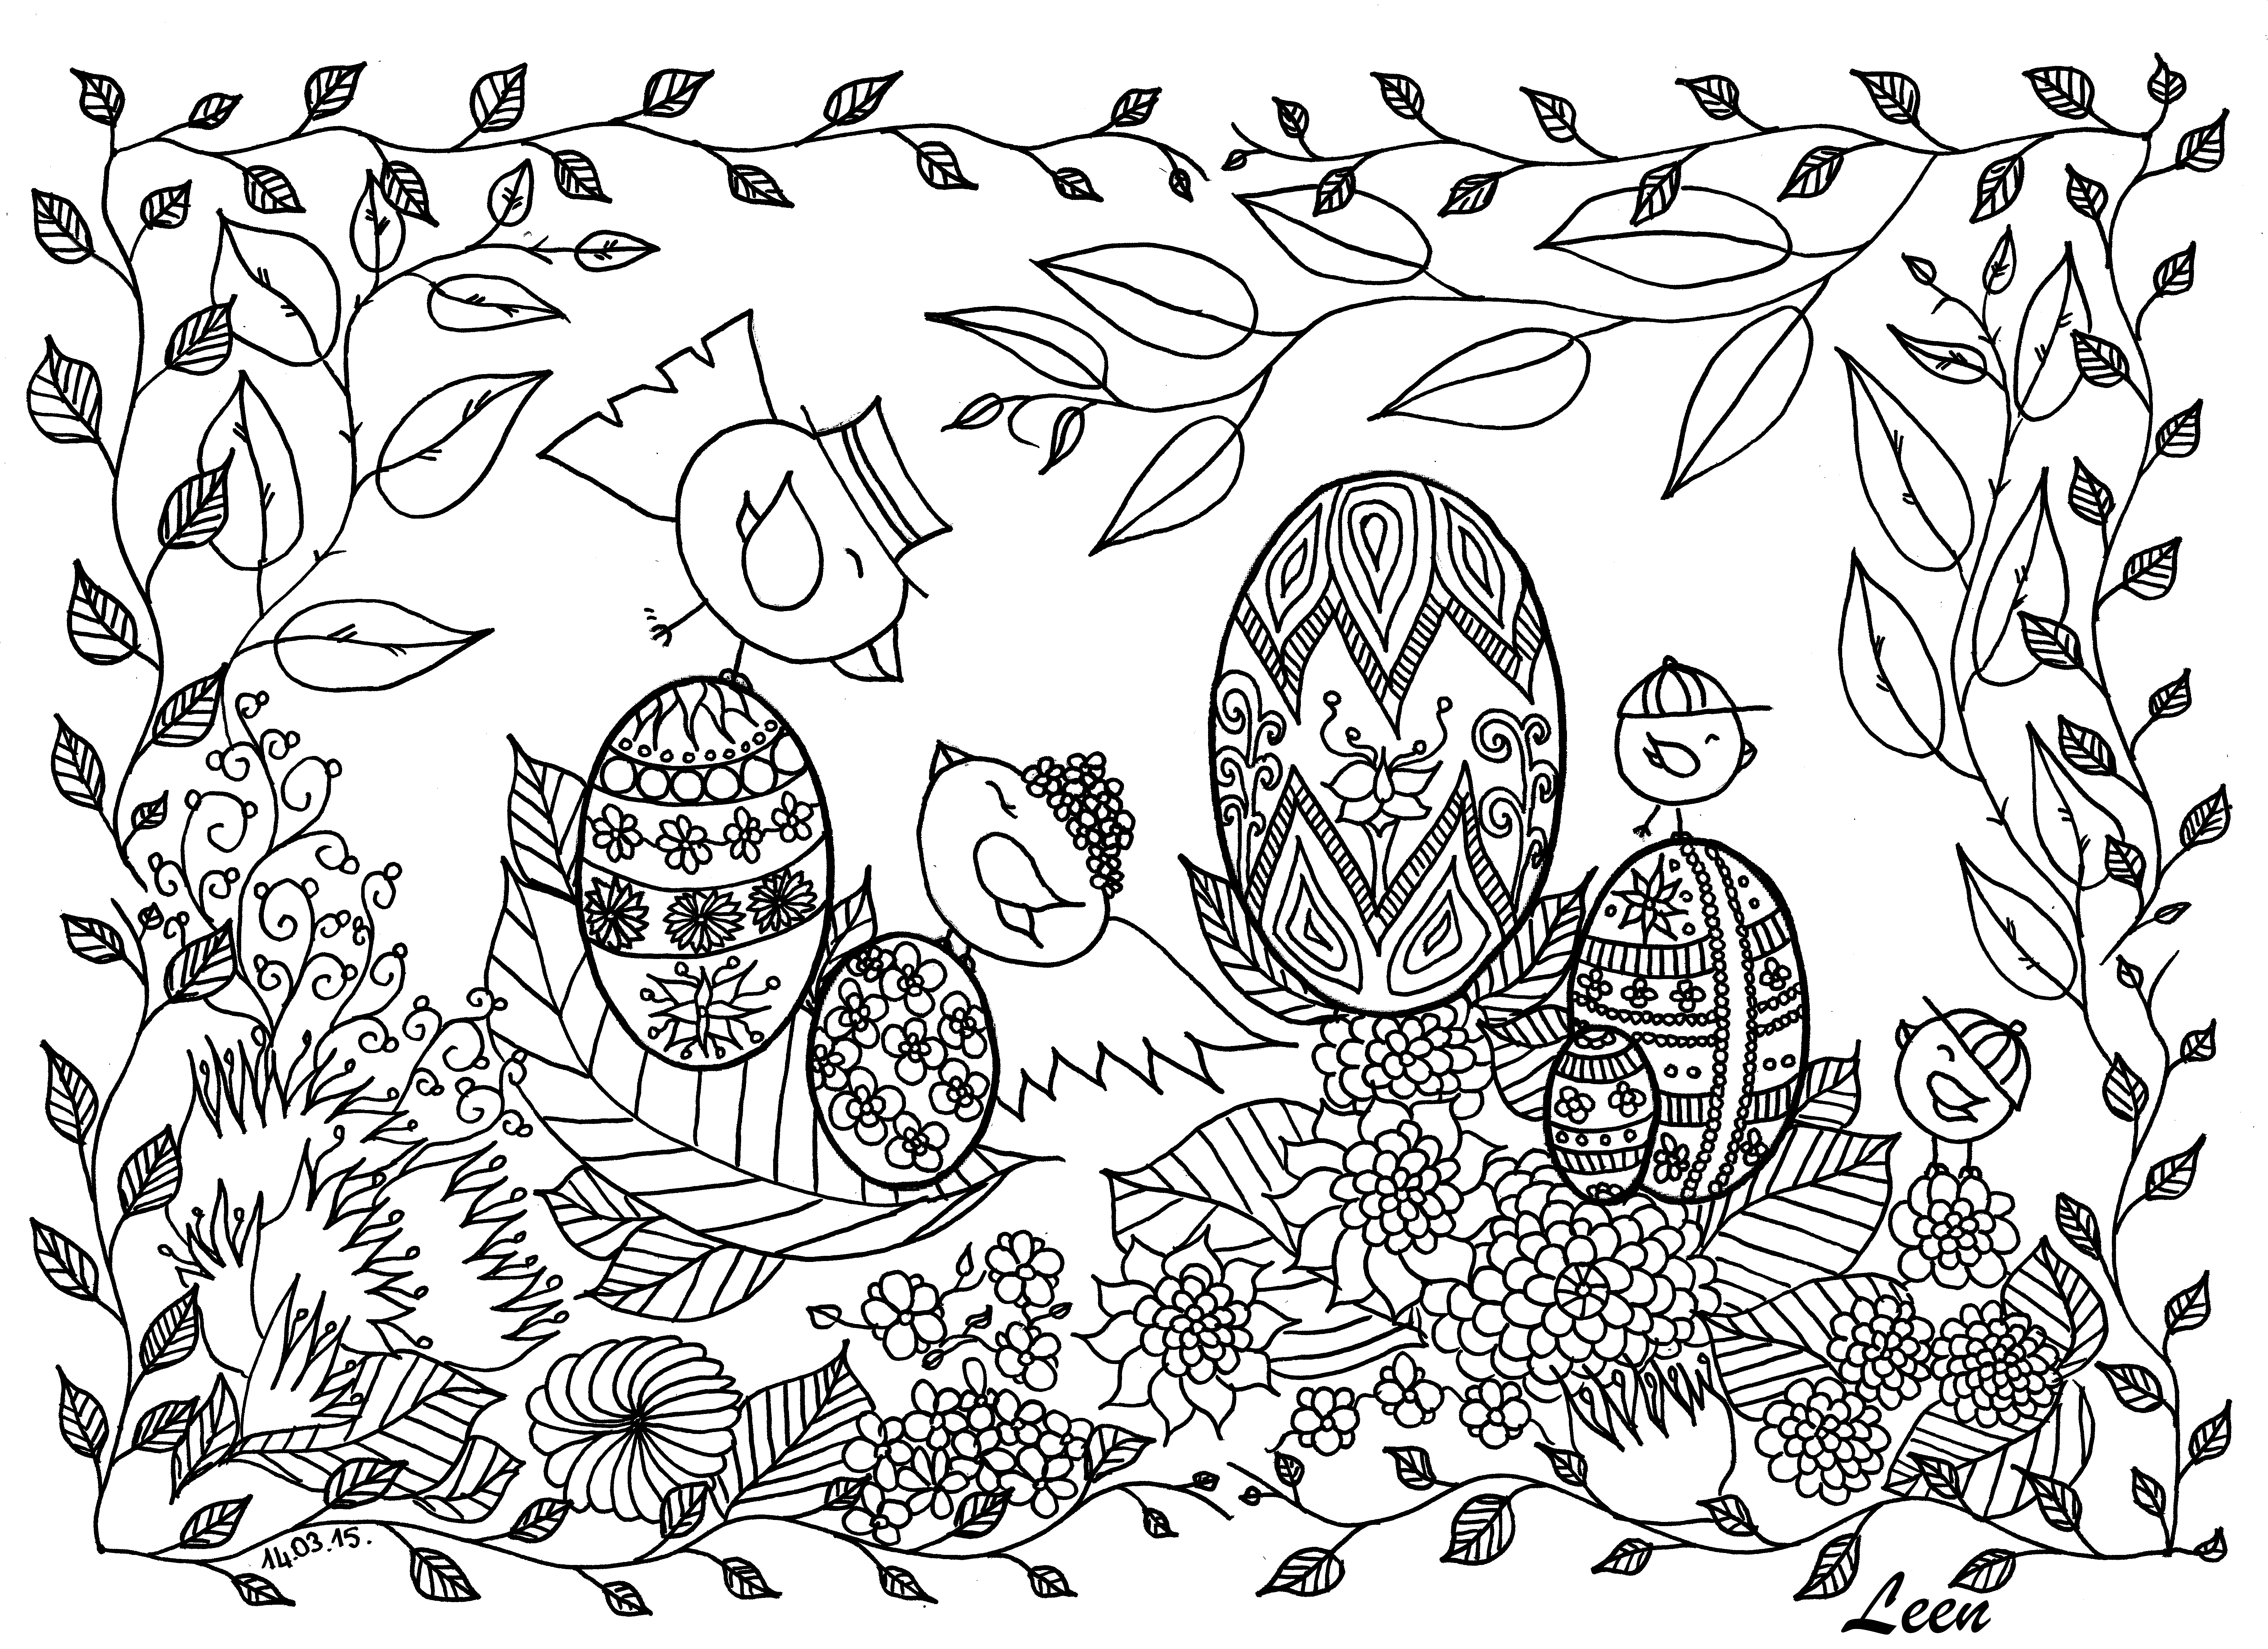 Coloring Pages For Adults Easter Coloring Pages Adult Easter Coloring Pages Alzenfieldwalk Org Free